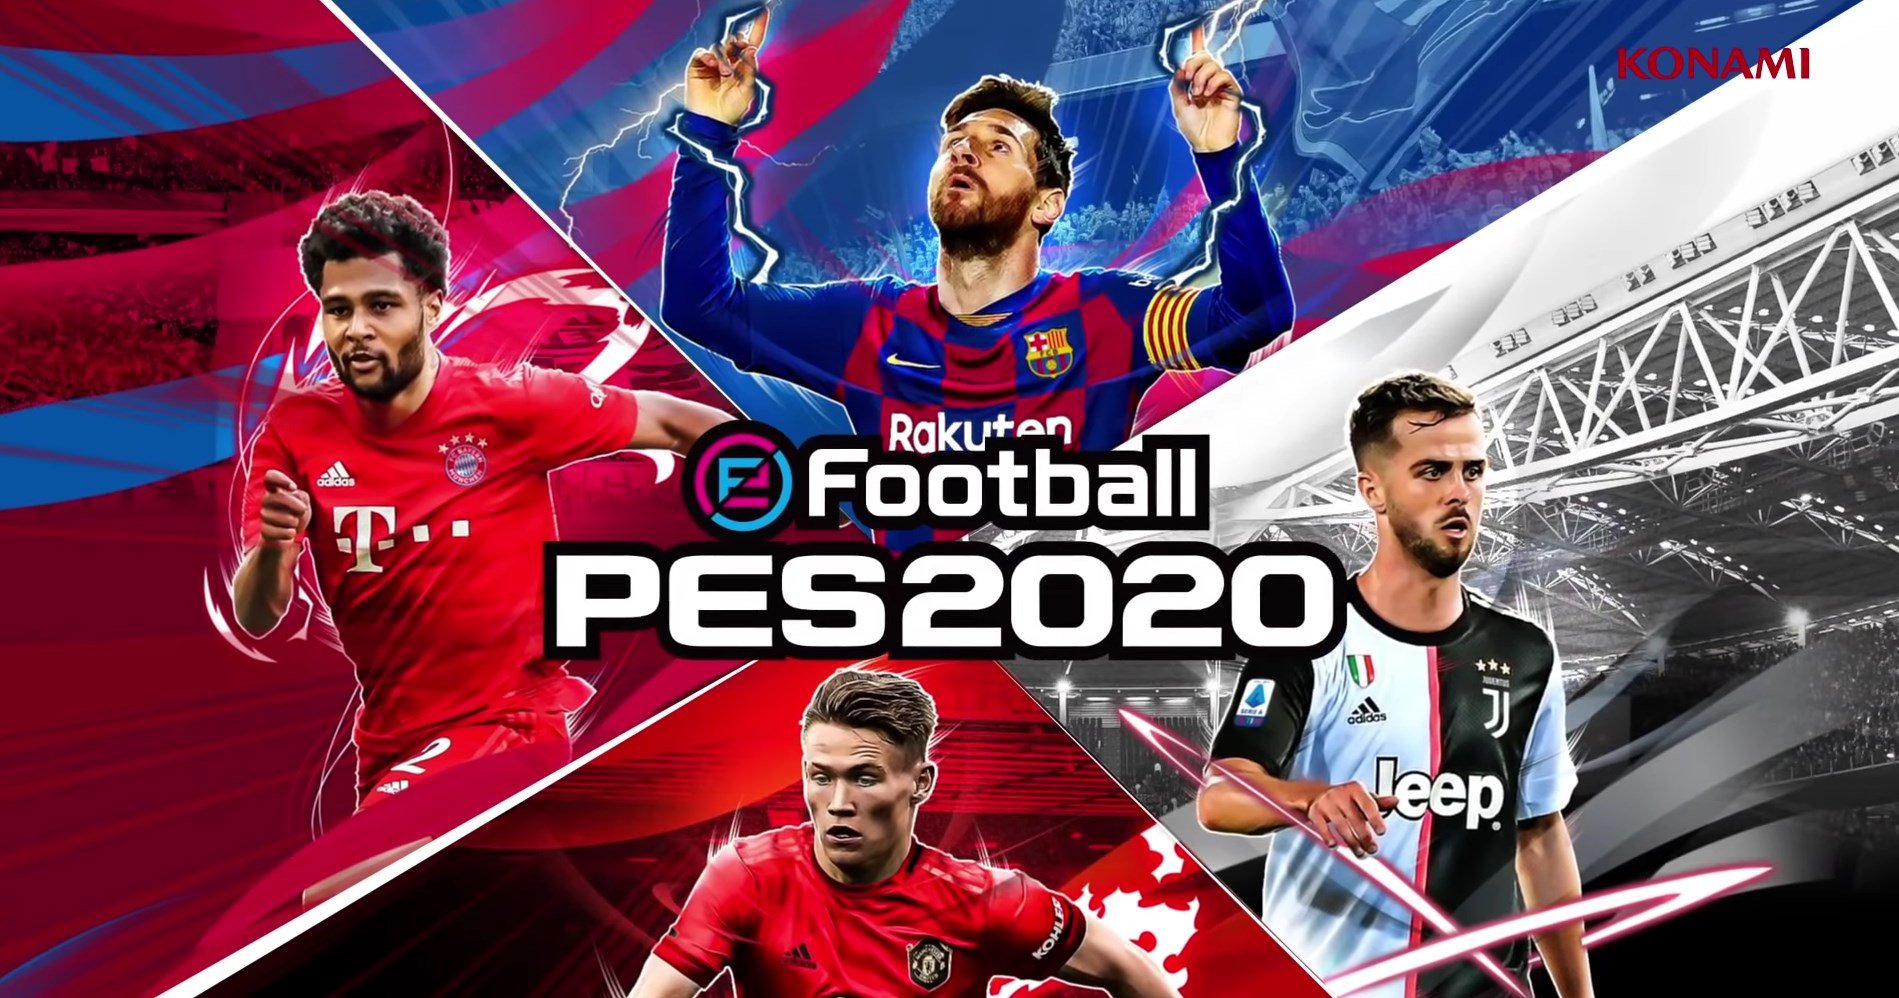 PES 2020 Mobile: Discover Legendary Players